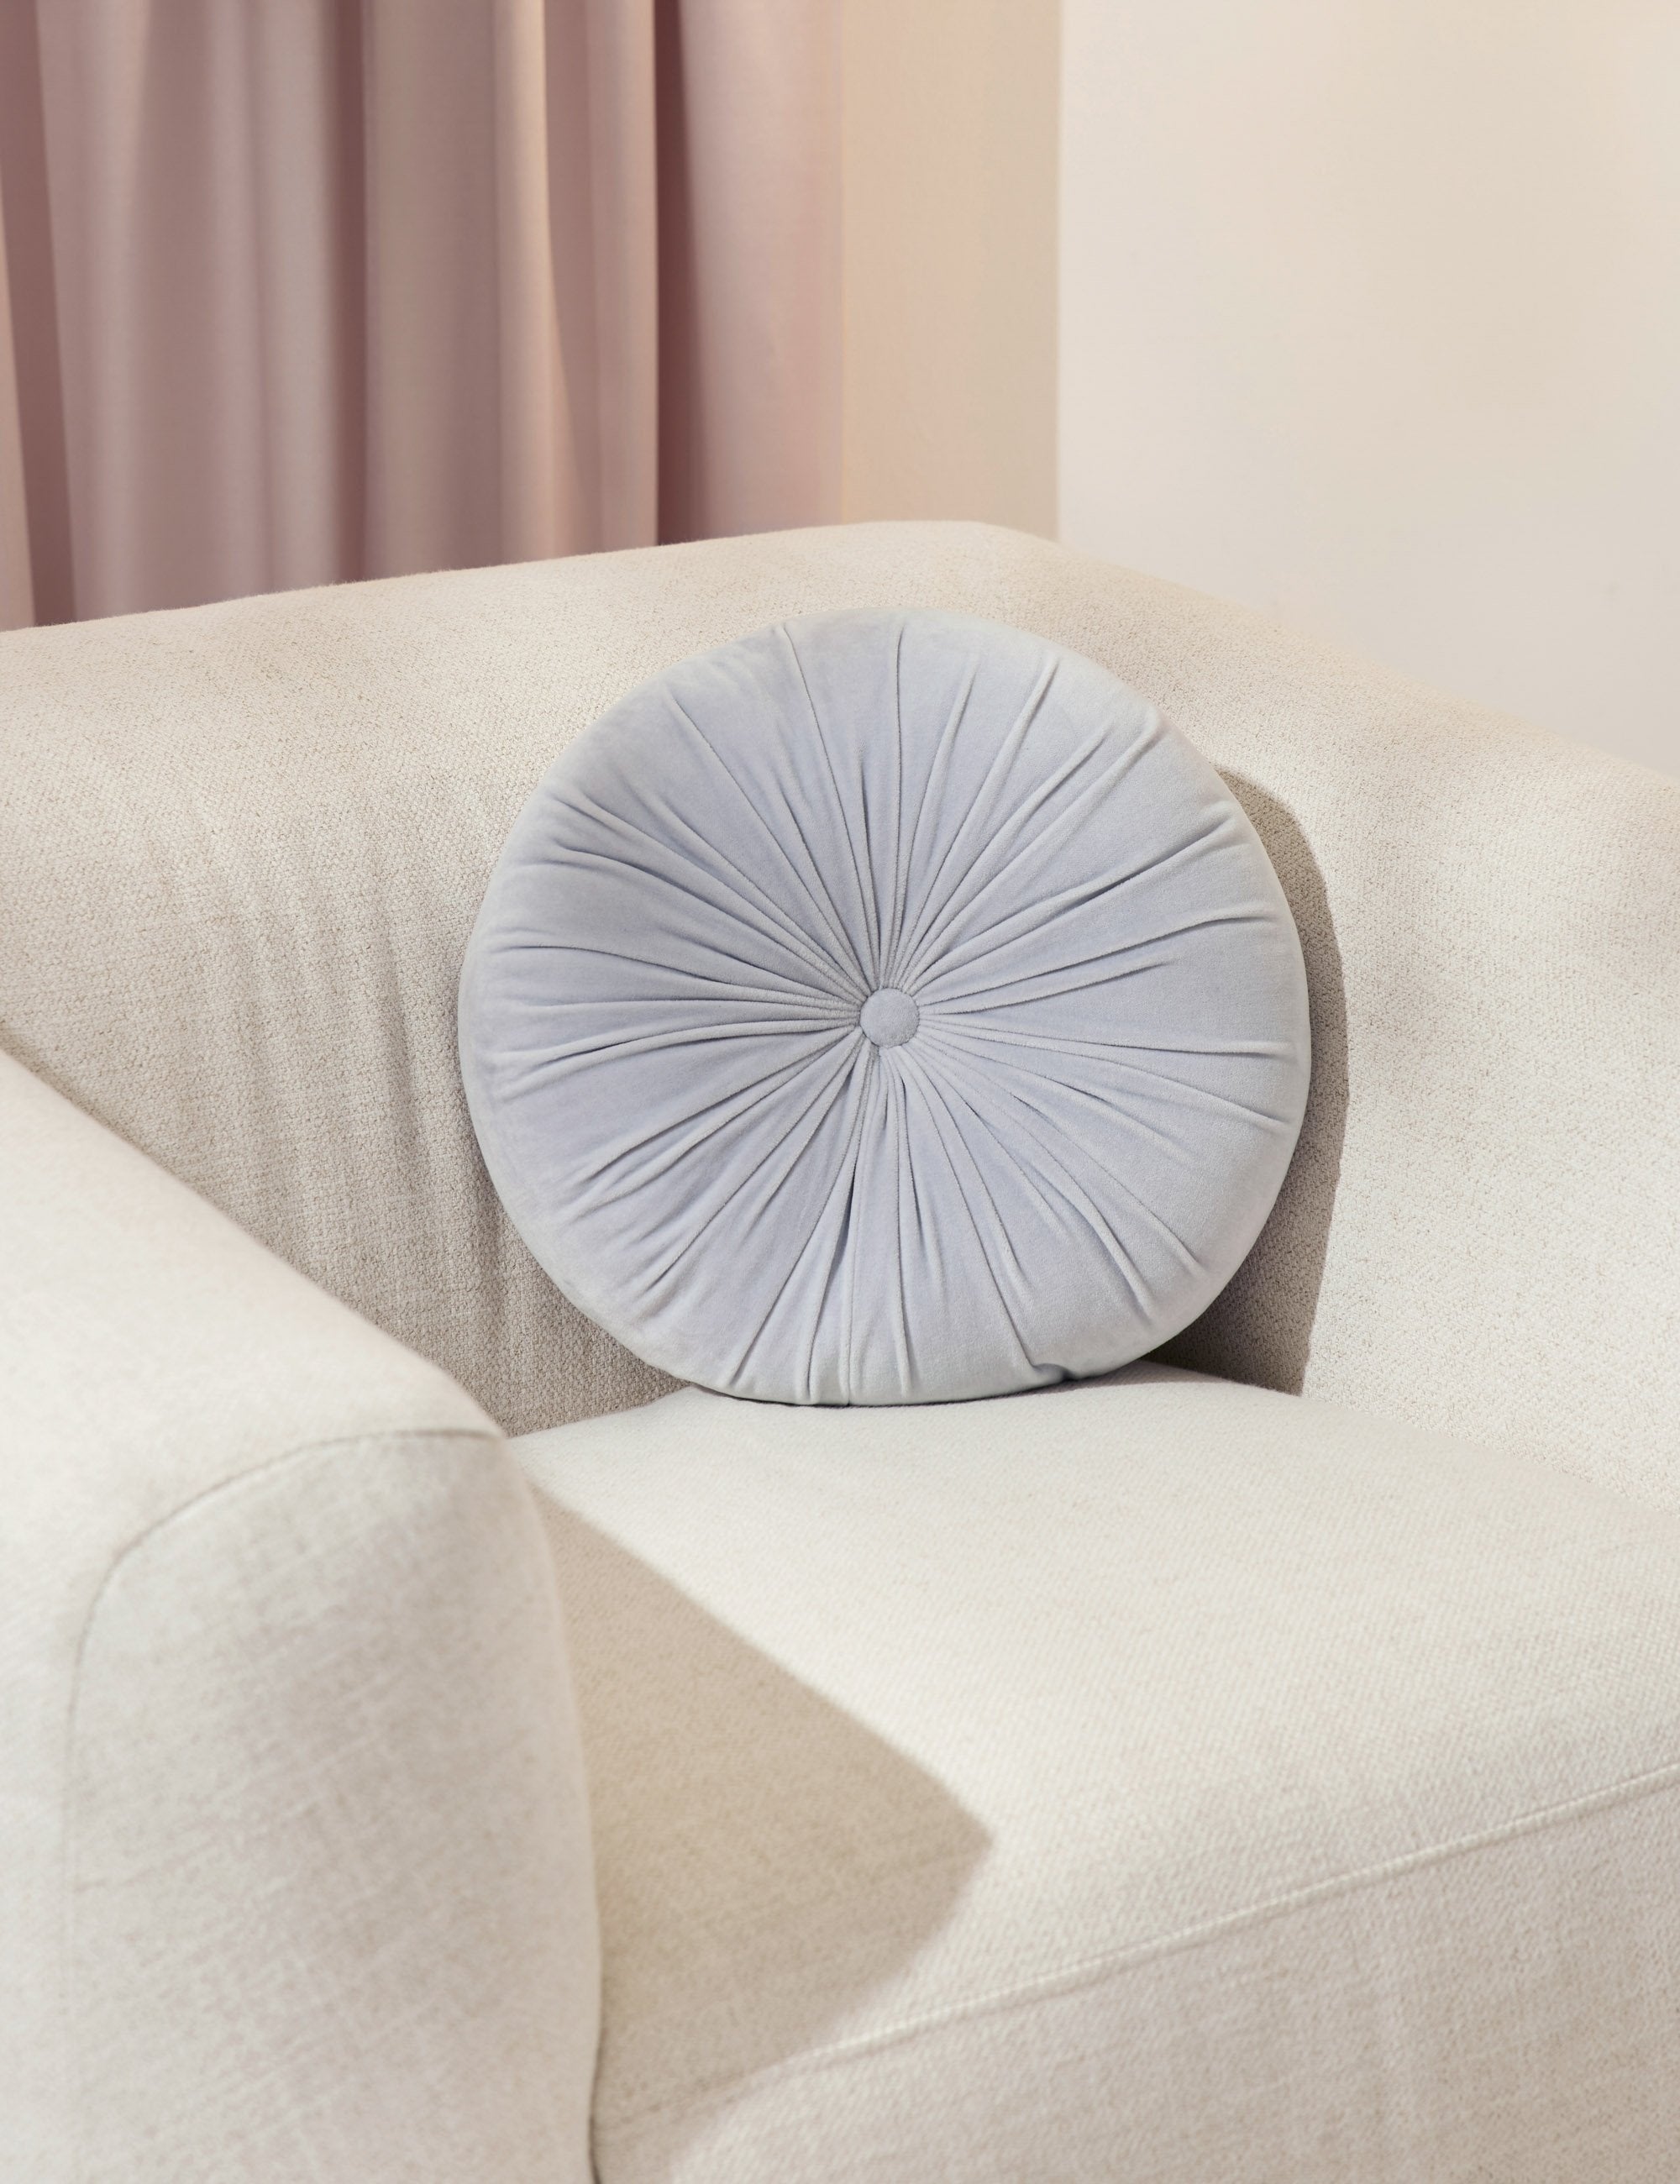 The Monroe ice blue velvet round pillow sits on a white accent chair